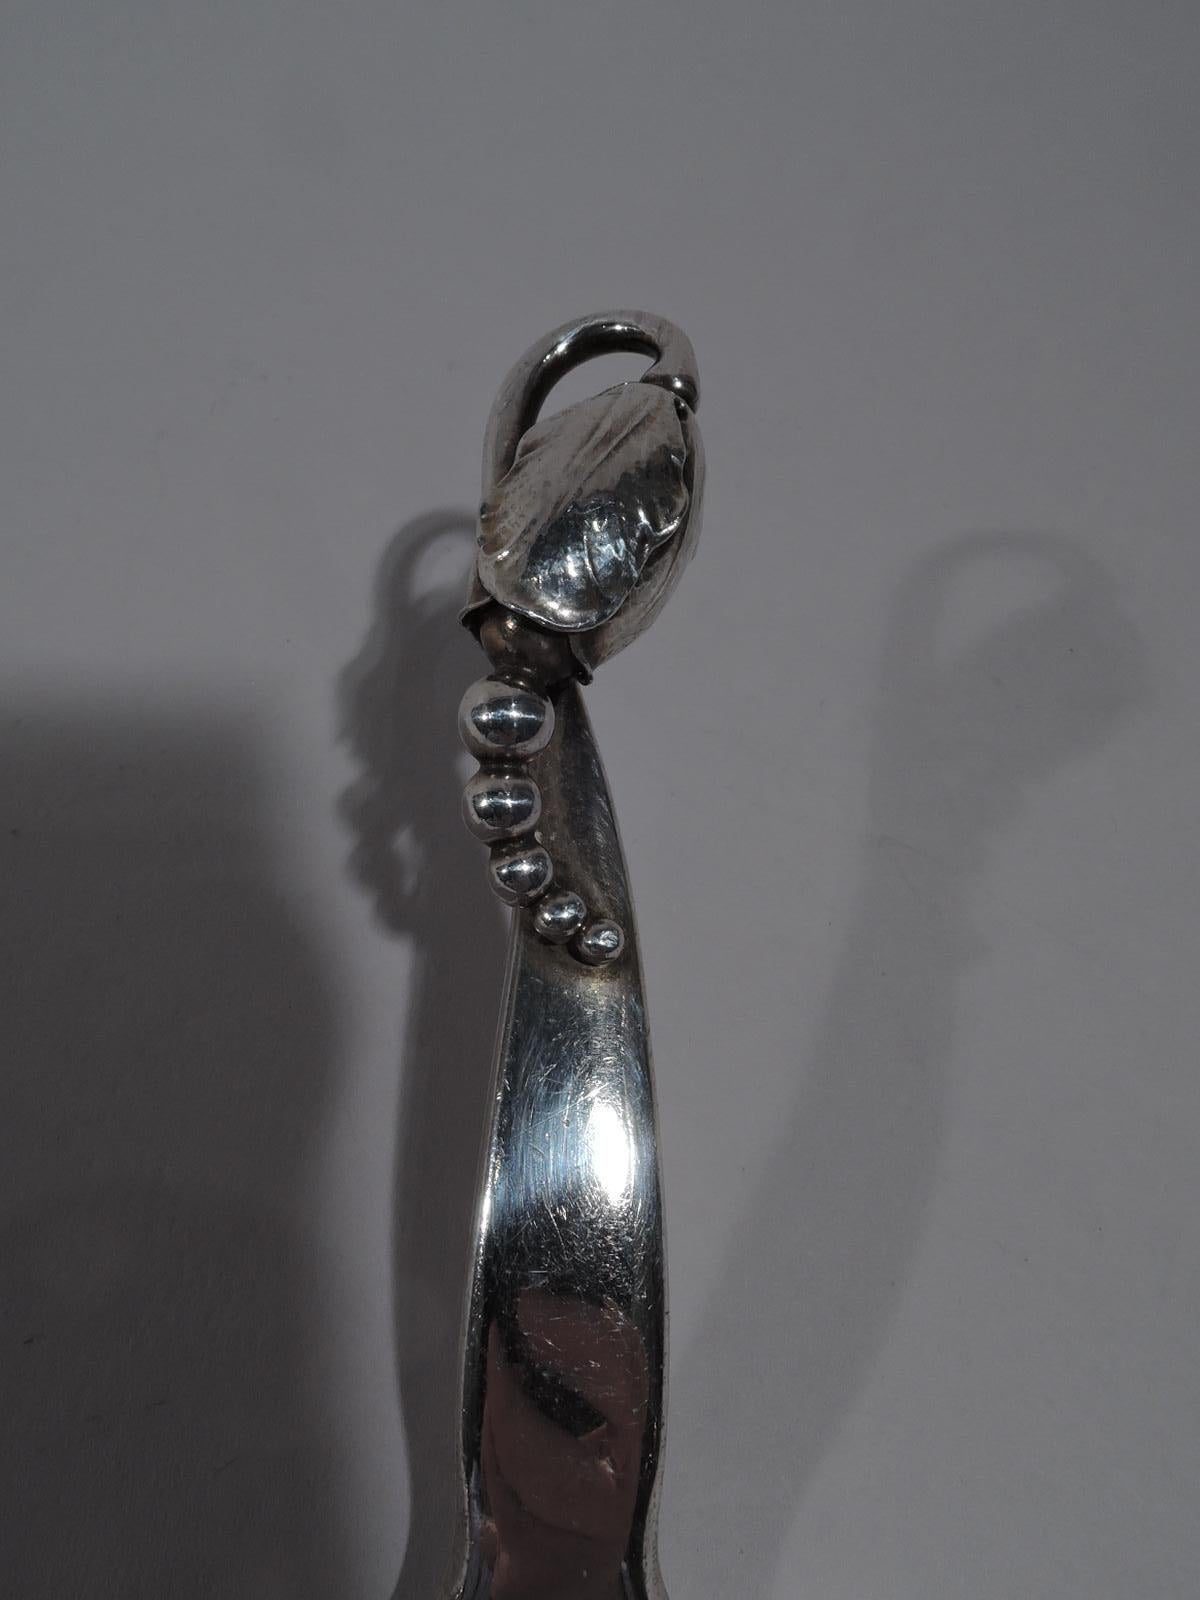 Blossom sterling silver pastry server. Made by Georg Jensen in Copenhagen. The Classic terminal with seeds spilling out of bud. Blade flat and triangular. A beautiful piece in the pattern designed by the master. Postwar marks include pattern no. 84.